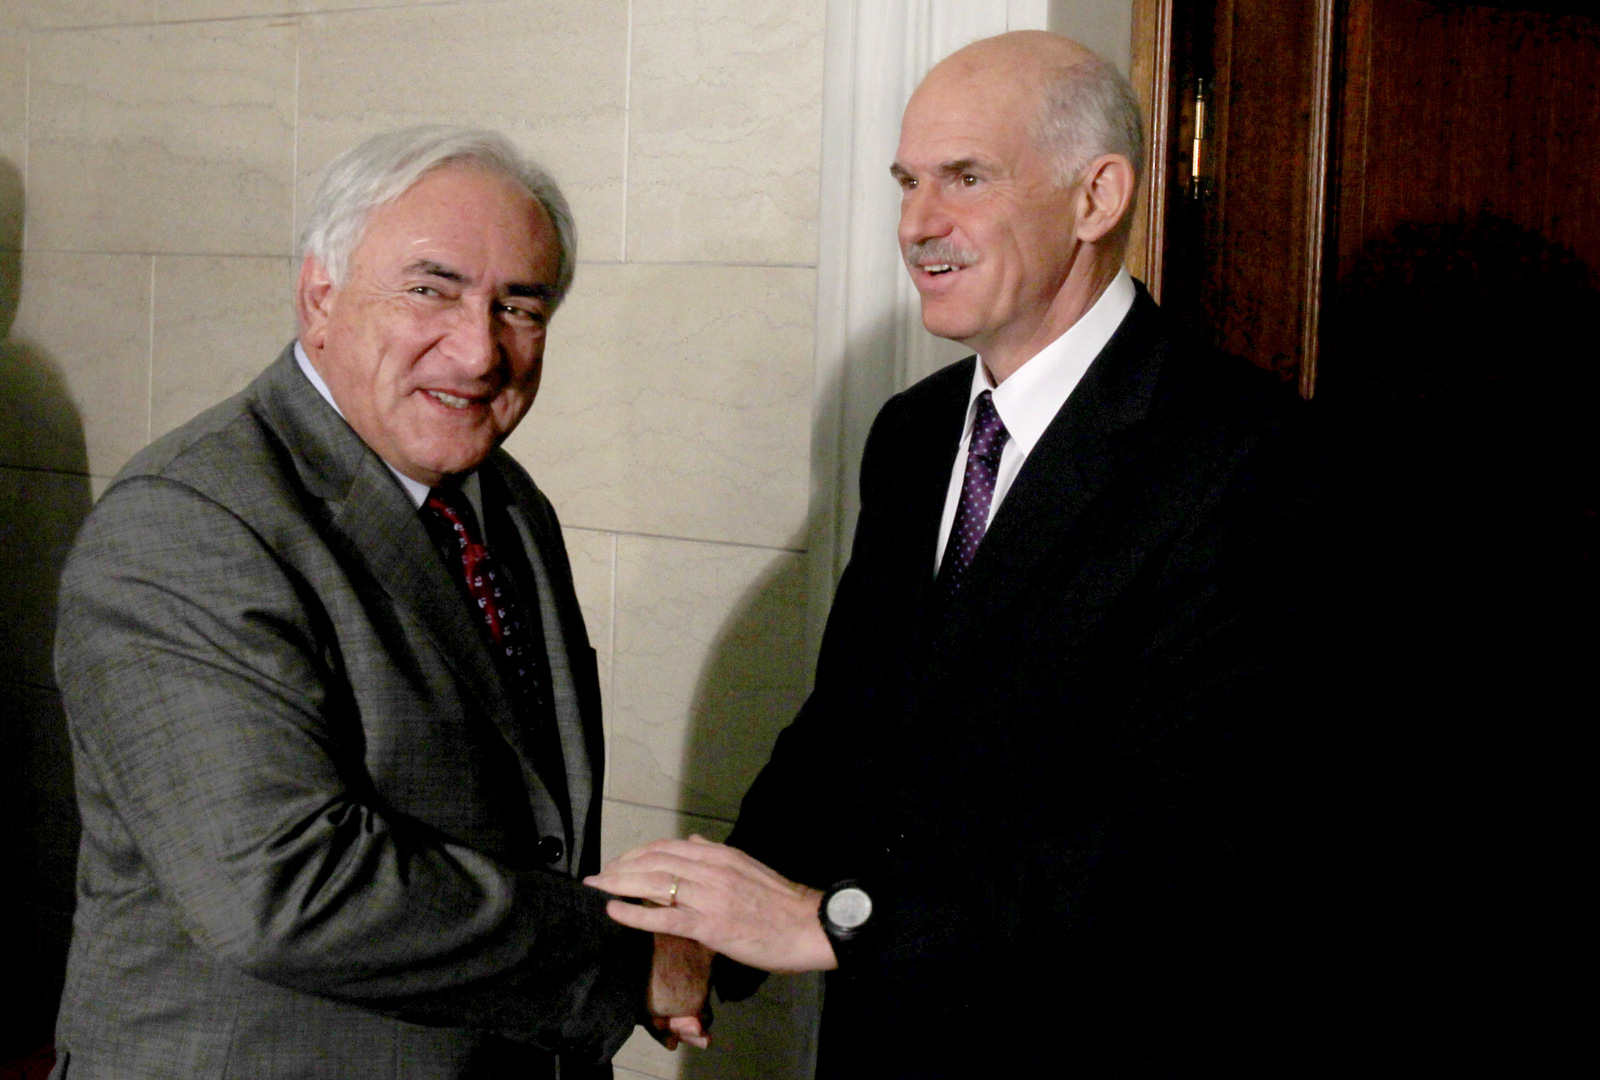 Greek Prime Minister George Papandreou, right, welcomes the head of the International Monetary Fund Dominique Strauss-Kahn at his office in Athens on Dec. 7, 2010. Strauss-Kahn was in Greece to negotiate terms of the repayment of the three-year euro110 billion ($150 billion) bailout loan intended to saved the debt-ridden country from default. (AP/Thanassis Stavrakis)